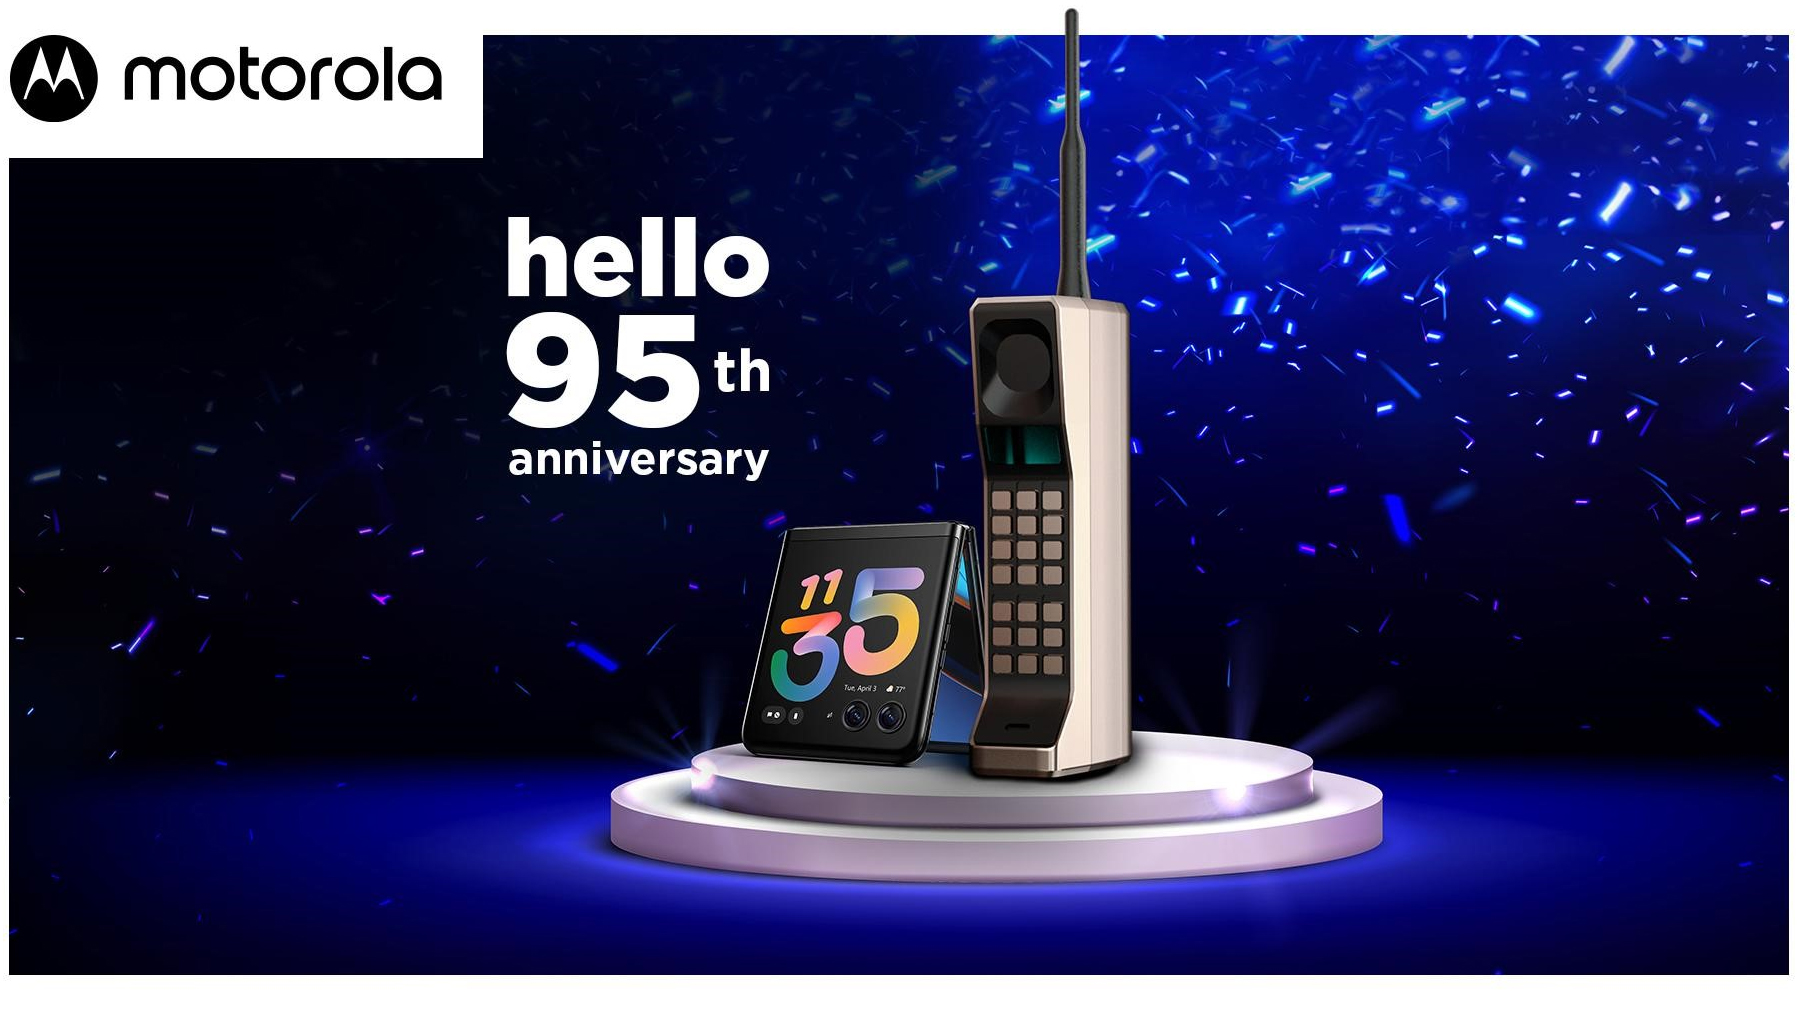 Motorola celebrates 95 years of existence and reveals plans for the next 95